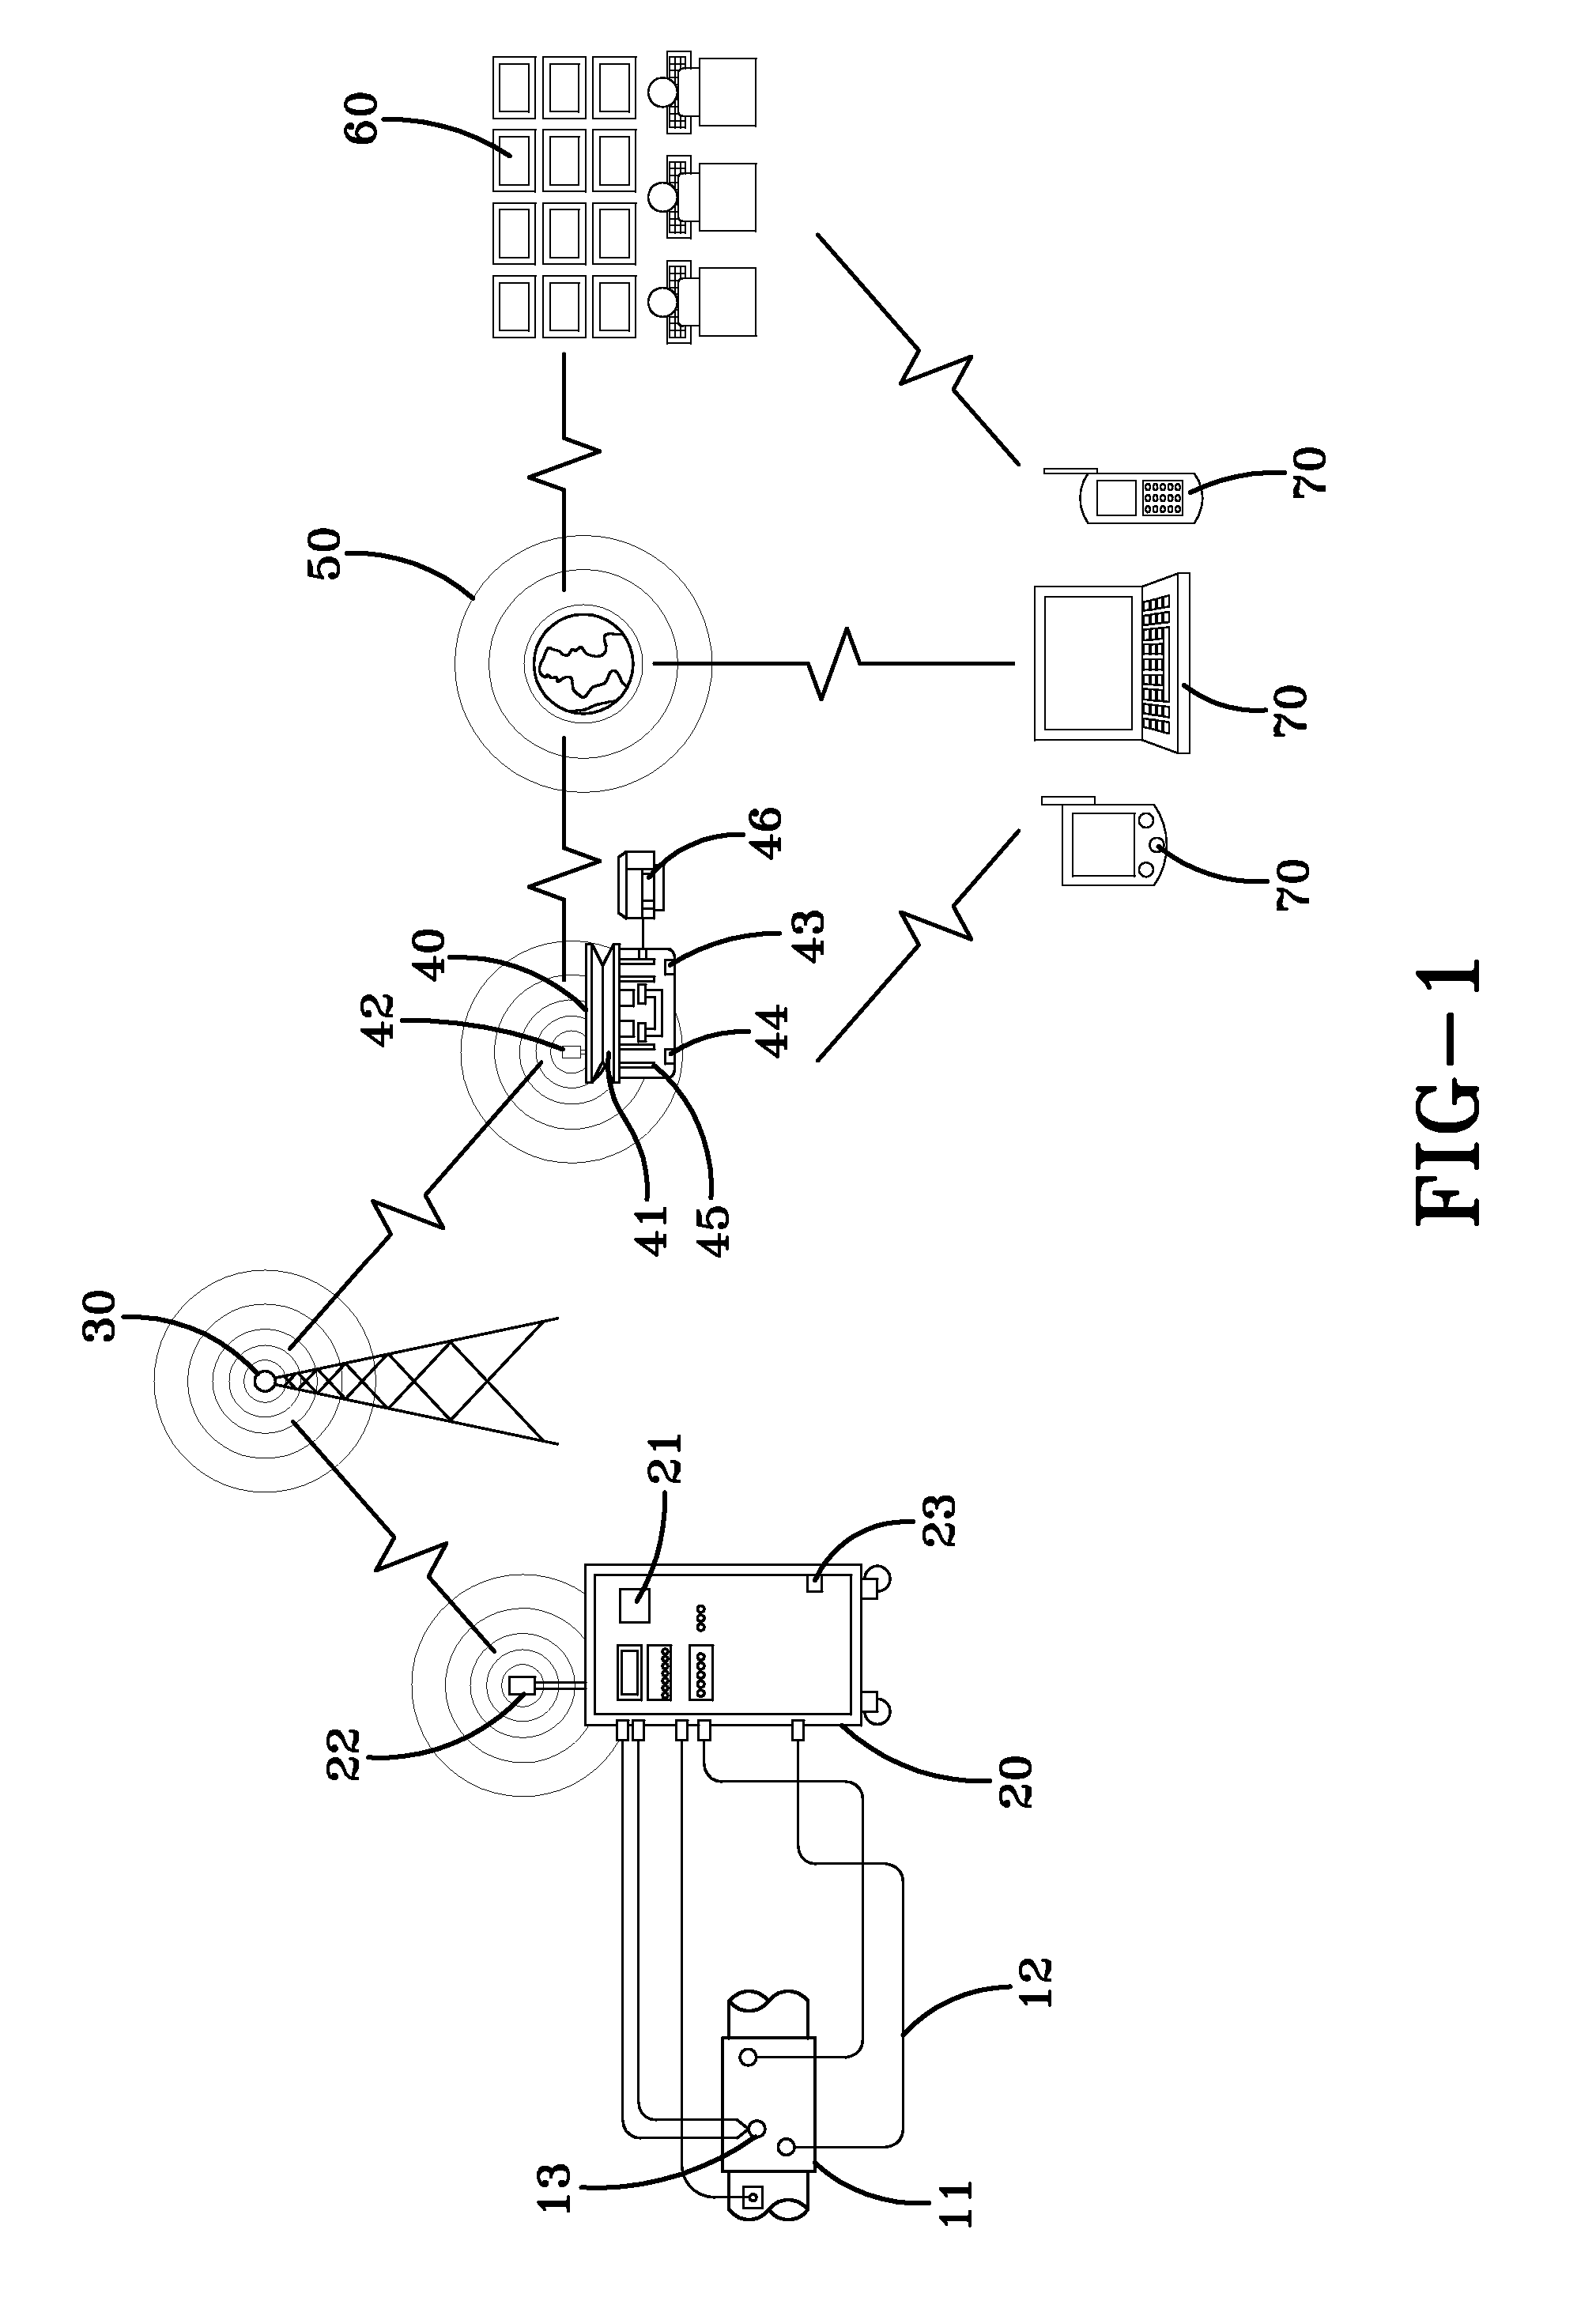 Method and apparatus for remote controlling monitoring and/or servicing heat-treatment equipment via wireless communications